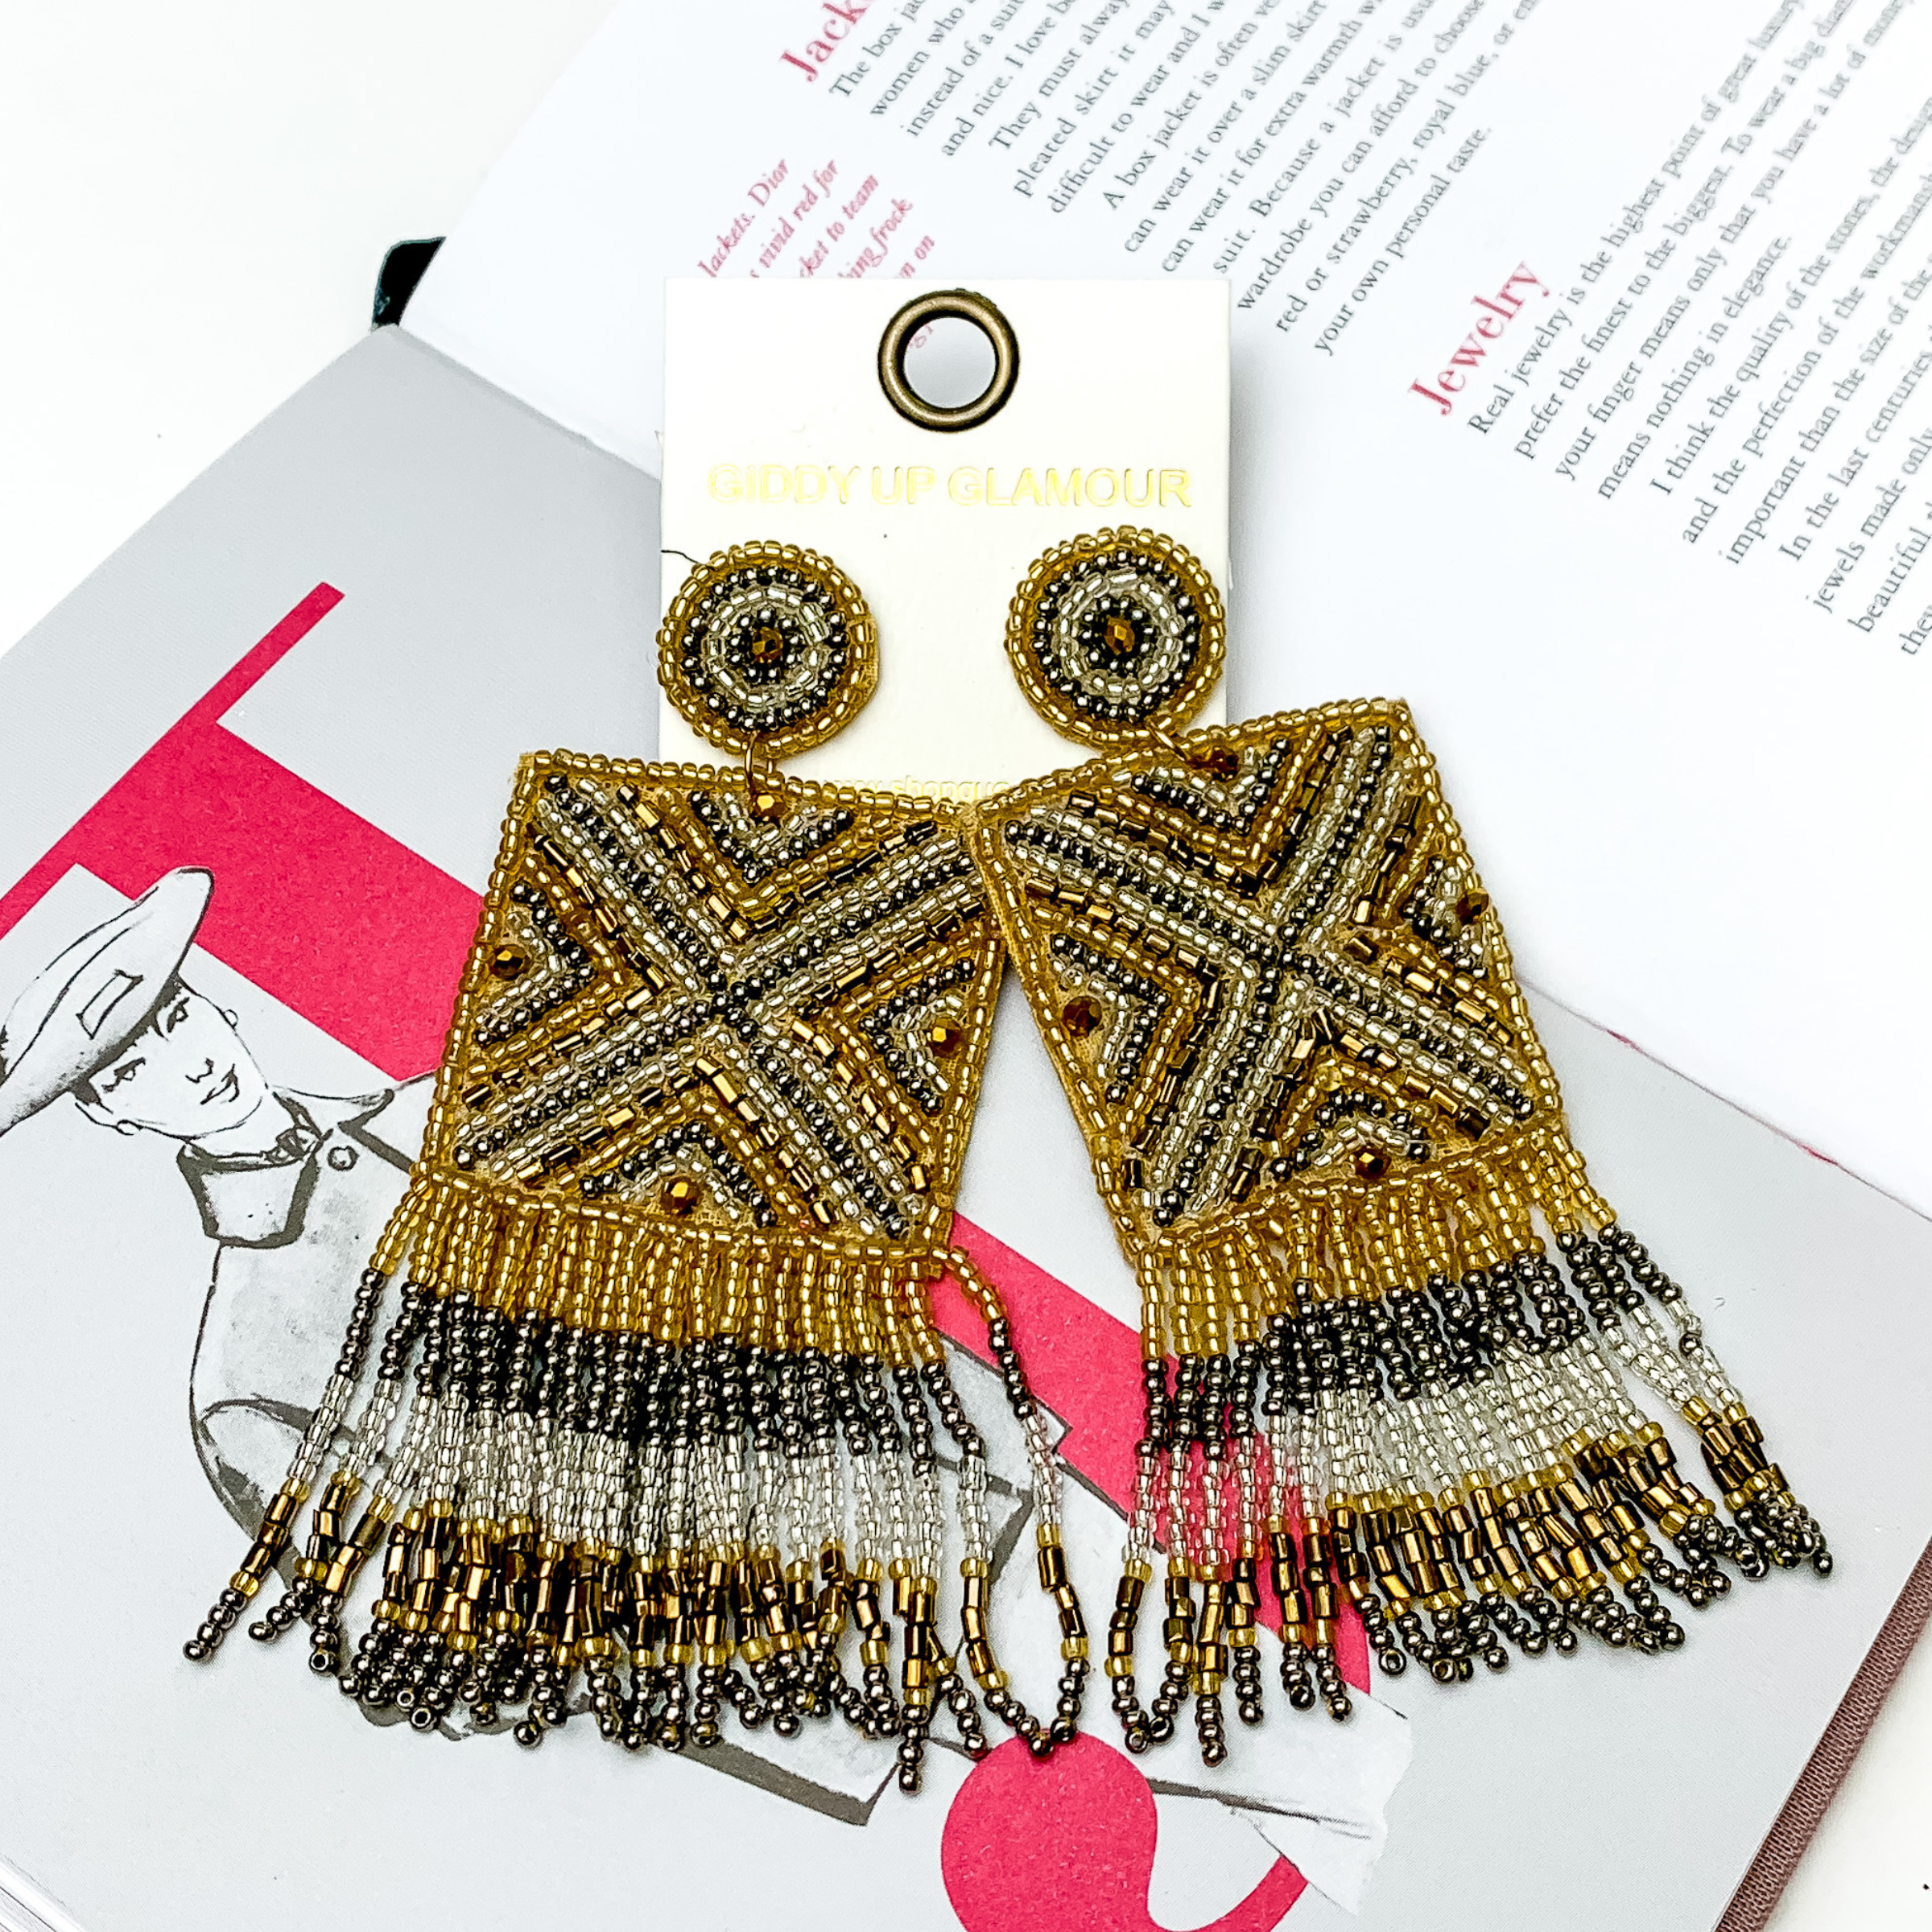 These are circle post back, beaded earrings with a beaded square drop that has fringe on the bottom side of the square. These earrings include gold beads, silver beads, and clear beads. These earrings are pictured on top of an open book on a white background. 